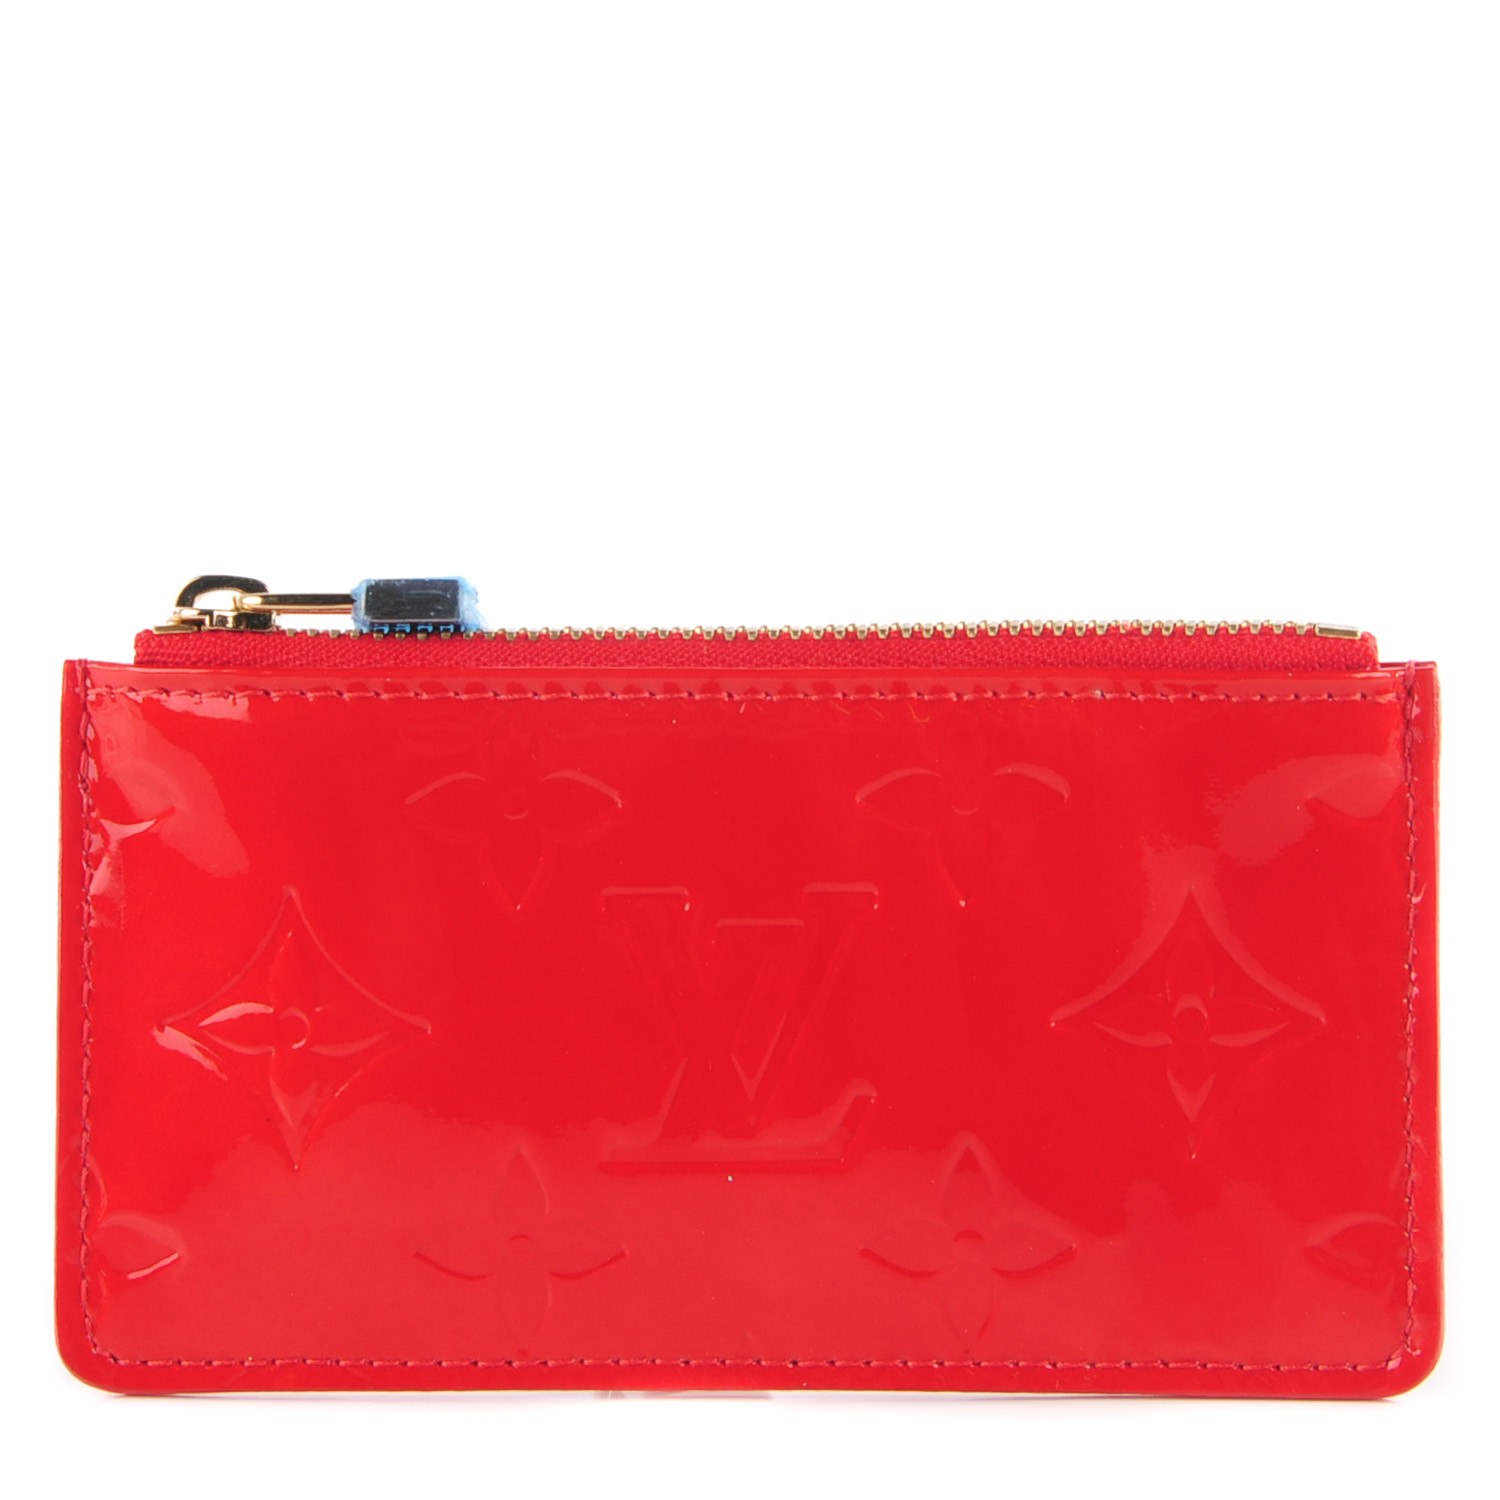 LOUIS VUITTON Vernis Key Pouch Rouge Red 114835